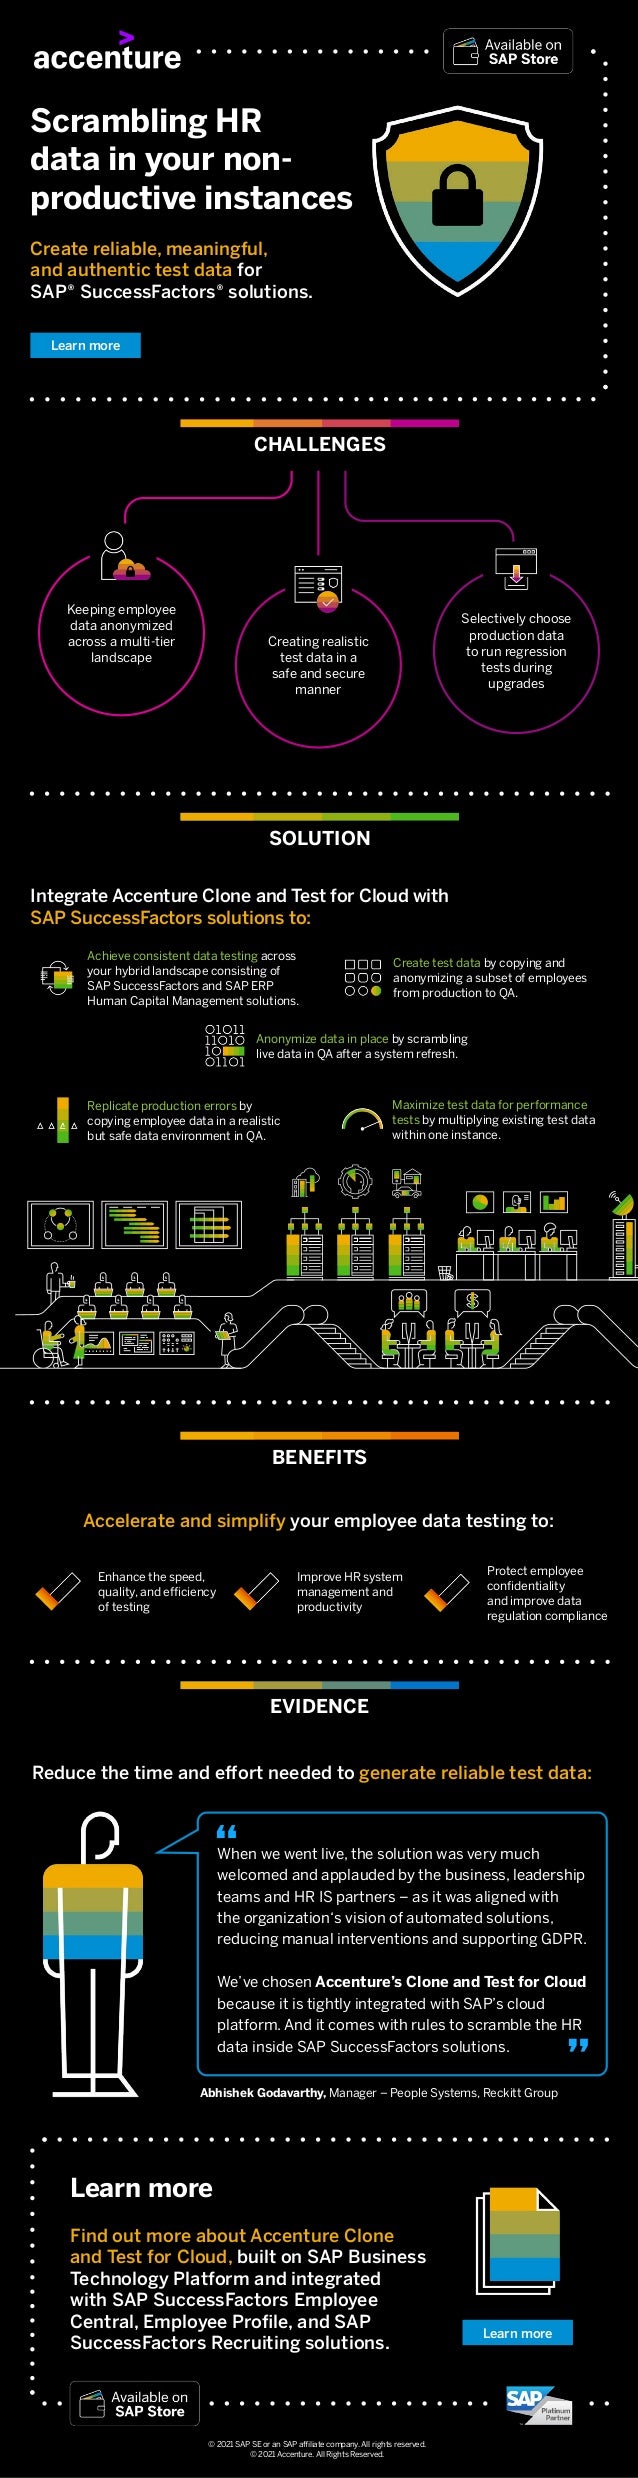 © 2021 SAP SE or an SAP affiliate company. All rights reserved.
© 2021 Accenture. All Rights Reserved.
Learn more
Reduce the time and effort needed to generate reliable test data:
Scrambling HR
data in your non-
productive instances
Create reliable, meaningful,
and authentic test data for
SAP® SuccessFactors® solutions.
CHALLENGES
EVIDENCE
Selectively choose
production data
to run regression
tests during
upgrades
Creating realistic
test data in a
safe and secure
manner
Keeping employee
data anonymized
across a multi-tier
landscape
Abhishek Godavarthy, Manager – People Systems, Reckitt Group
When we went live, the solution was very much
welcomed and applauded by the business, leadership
teams and HR IS partners – as it was aligned with
the organization‘s vision of automated solutions,
reducing manual interventions and supporting GDPR.
We’ve chosen Accenture’s Clone and Test for Cloud
because it is tightly integrated with SAP’s cloud
platform. And it comes with rules to scramble the HR
data inside SAP SuccessFactors solutions.
Find out more about Accenture Clone
and Test for Cloud, built on SAP Business
Technology Platform and integrated
with SAP SuccessFactors Employee
Central, Employee Profile, and SAP
SuccessFactors Recruiting solutions.
Learn more
Integrate Accenture Clone and Test for Cloud with
SAP SuccessFactors solutions to:
SOLUTION
Accelerate and simplify your employee data testing to:
Enhance the speed,
quality, and efficiency
of testing
Improve HR system
management and
productivity
Protect employee
confidentiality
and improve data
regulation compliance
BENEFITS
Achieve consistent data testing across
your hybrid landscape consisting of
SAP SuccessFactors and SAP ERP
Human Capital Management solutions.
Create test data by copying and
anonymizing a subset of employees
from production to QA.
Anonymize data in place by scrambling
live data in QA after a system refresh.
Maximize test data for performance
tests by multiplying existing test data
within one instance.
Replicate production errors by
copying employee data in a realistic
but safe data environment in QA.
Learn more
 